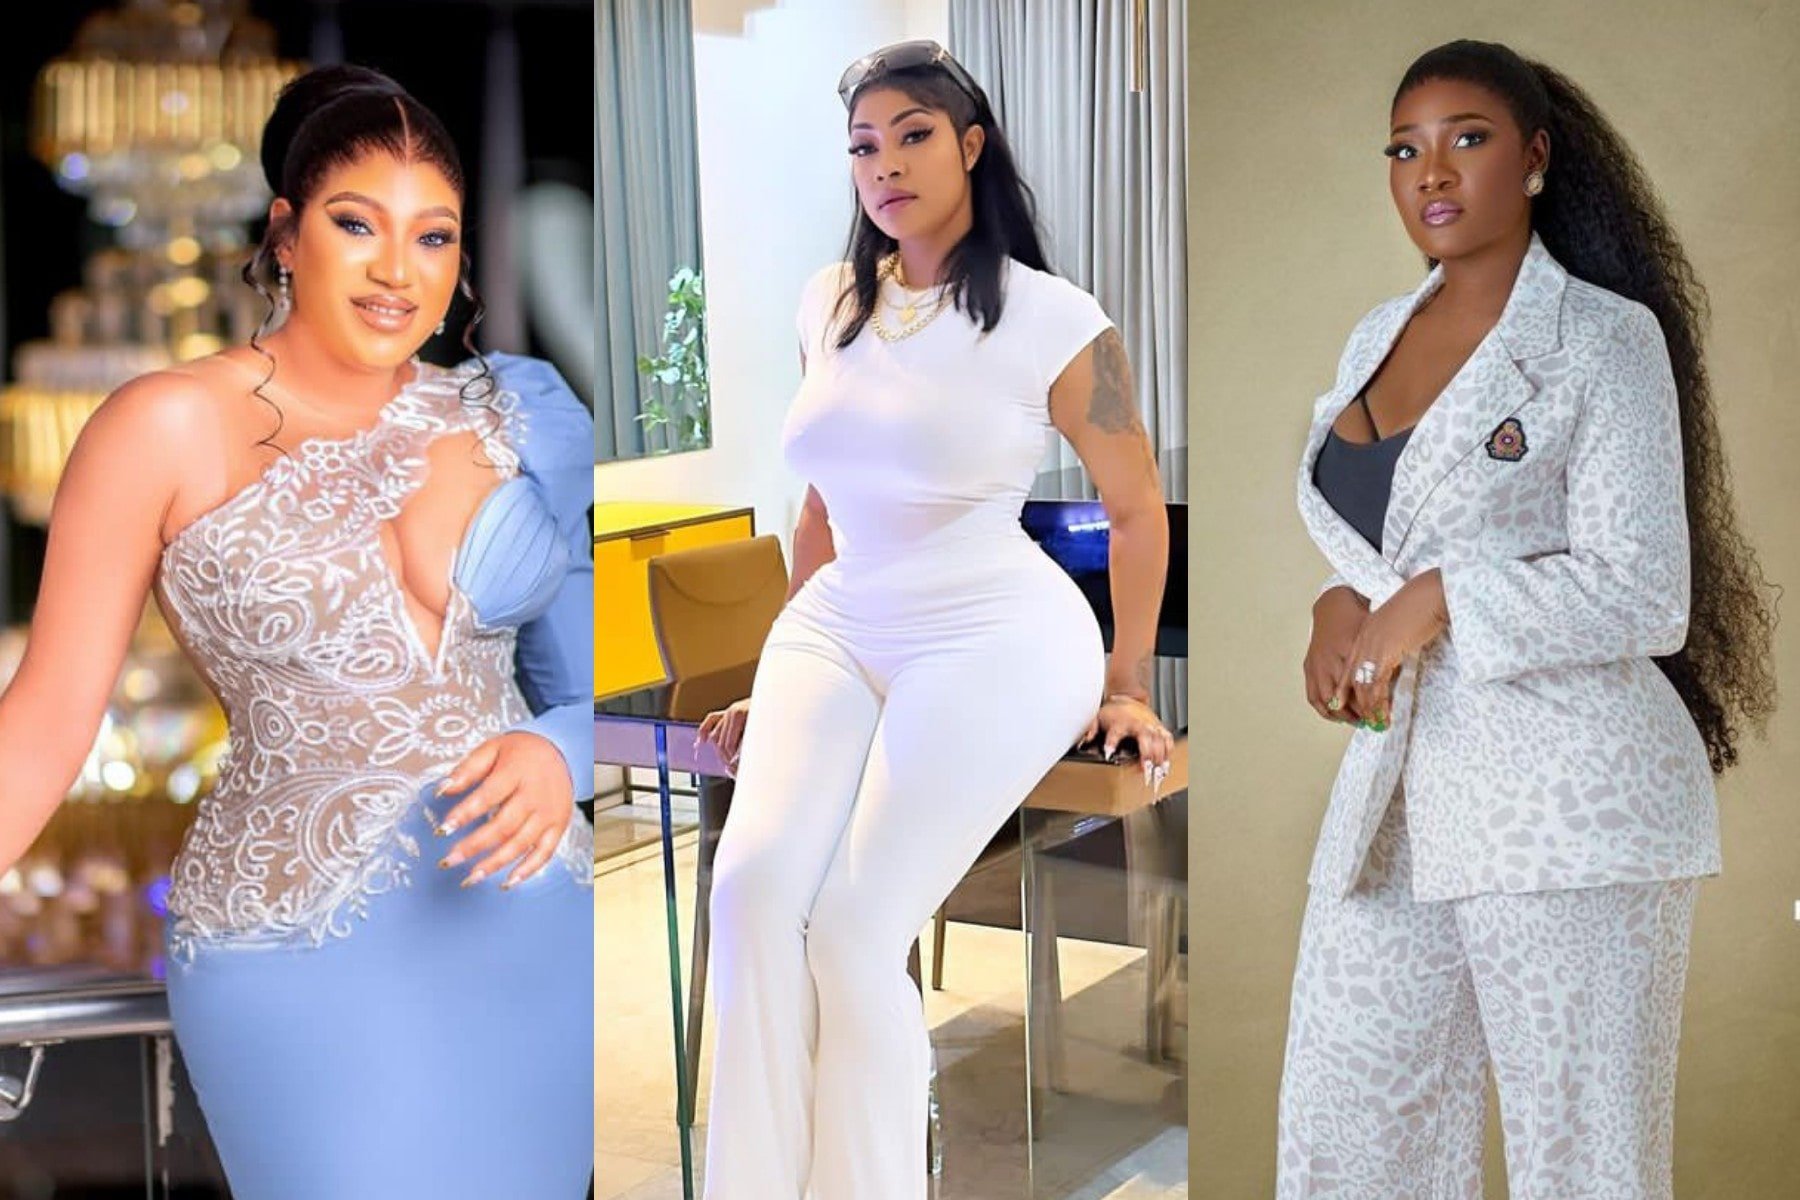 “She removed me from posters, and Angela Okorie always supported whatever she did” – Queeneth Hilbert continues to share her ordeal with Mercy Johnson